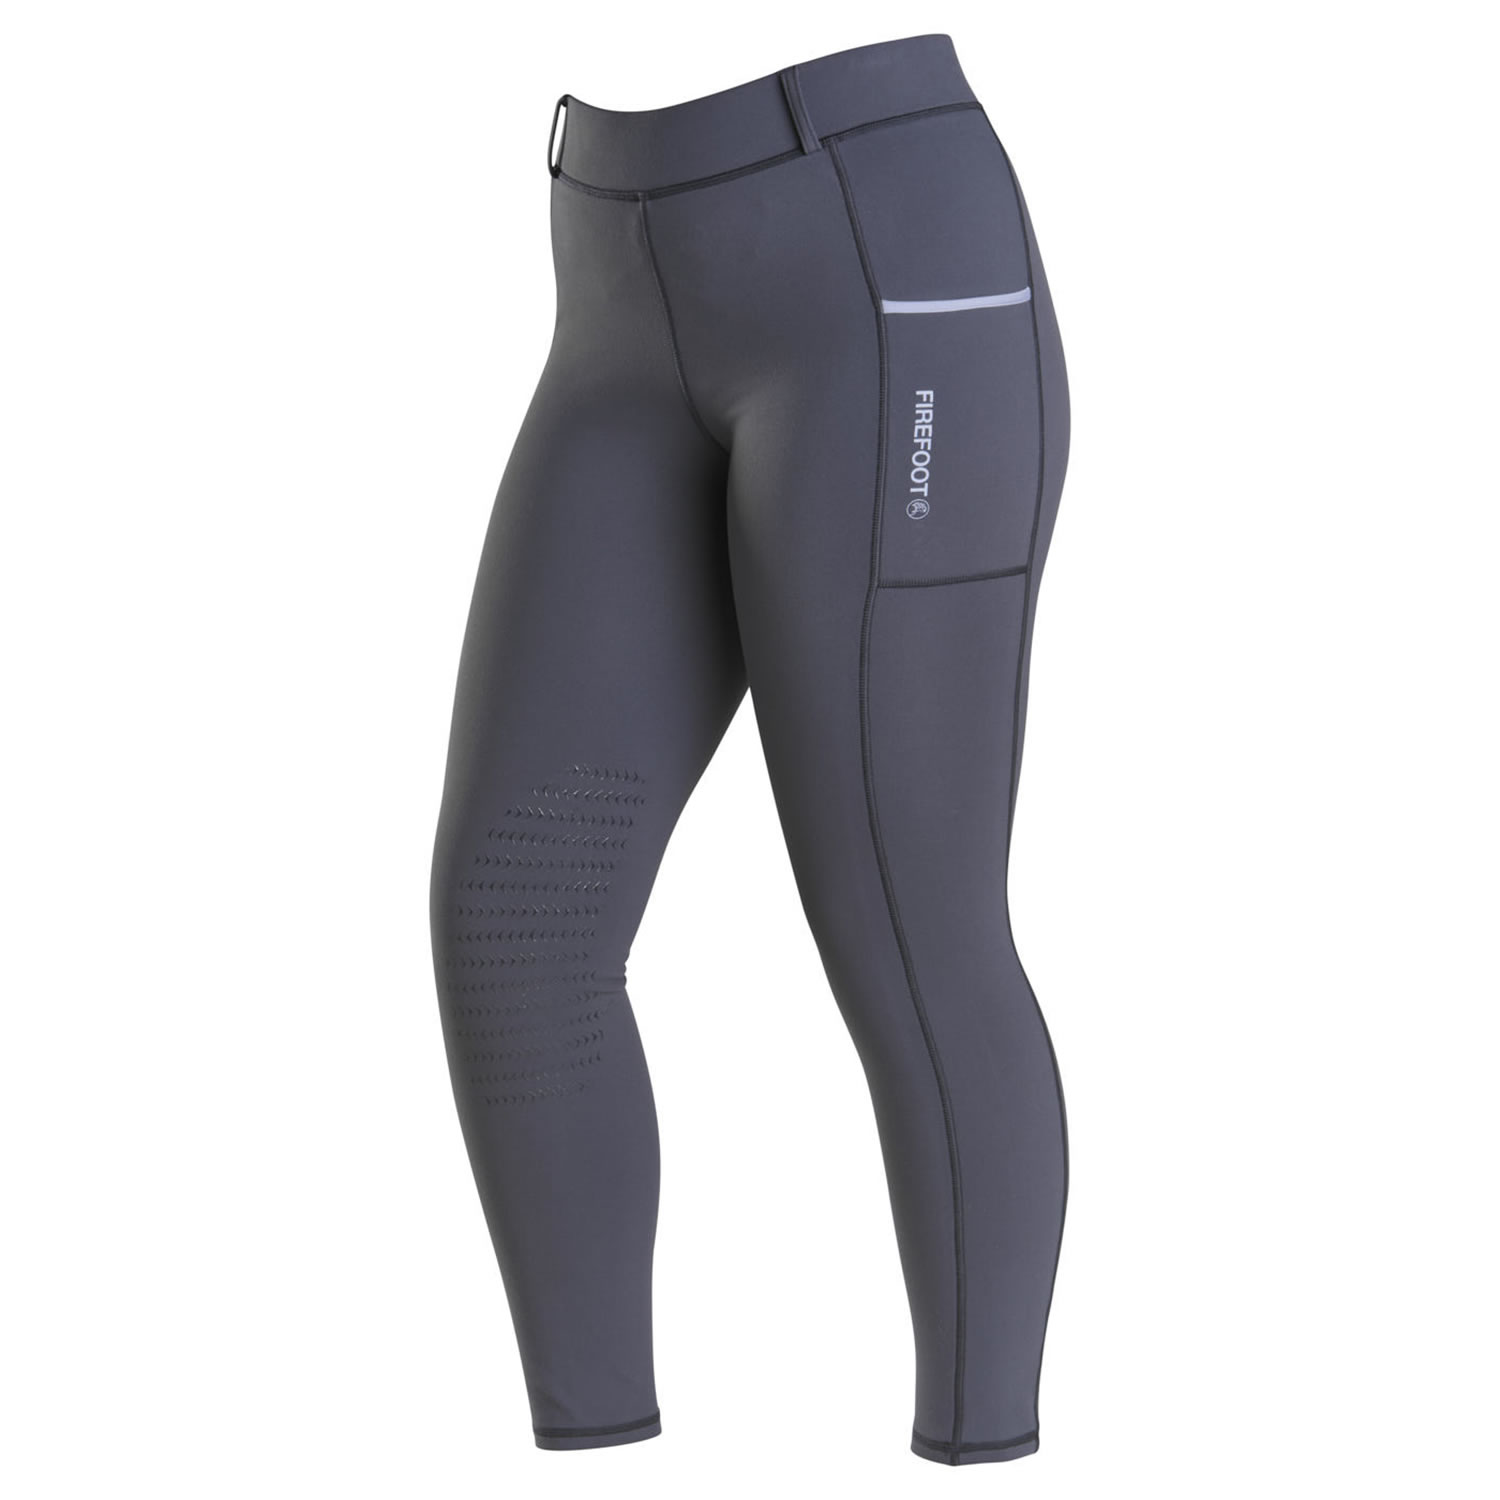 FIREFOOT THIRSK FLEECE LINED BREECHES LADIES CHARCOAL/BLUE